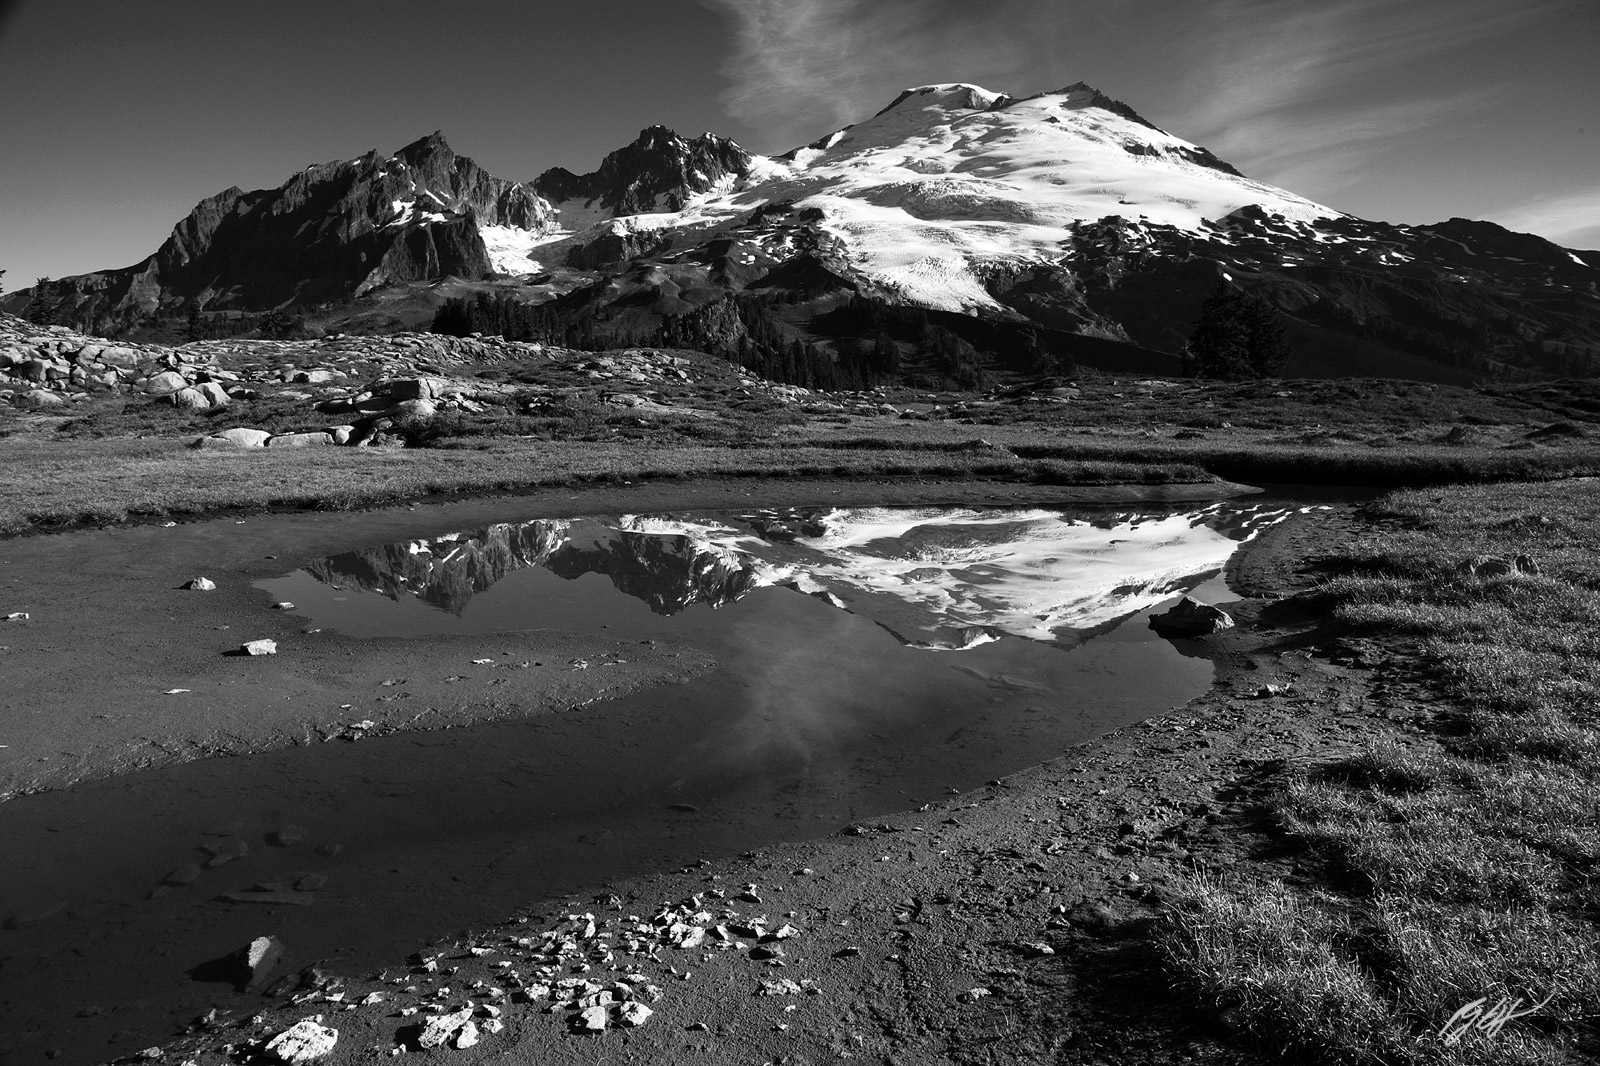 Mt Baker from Park Butte in the Mt Baker National Recreation Area in Washington